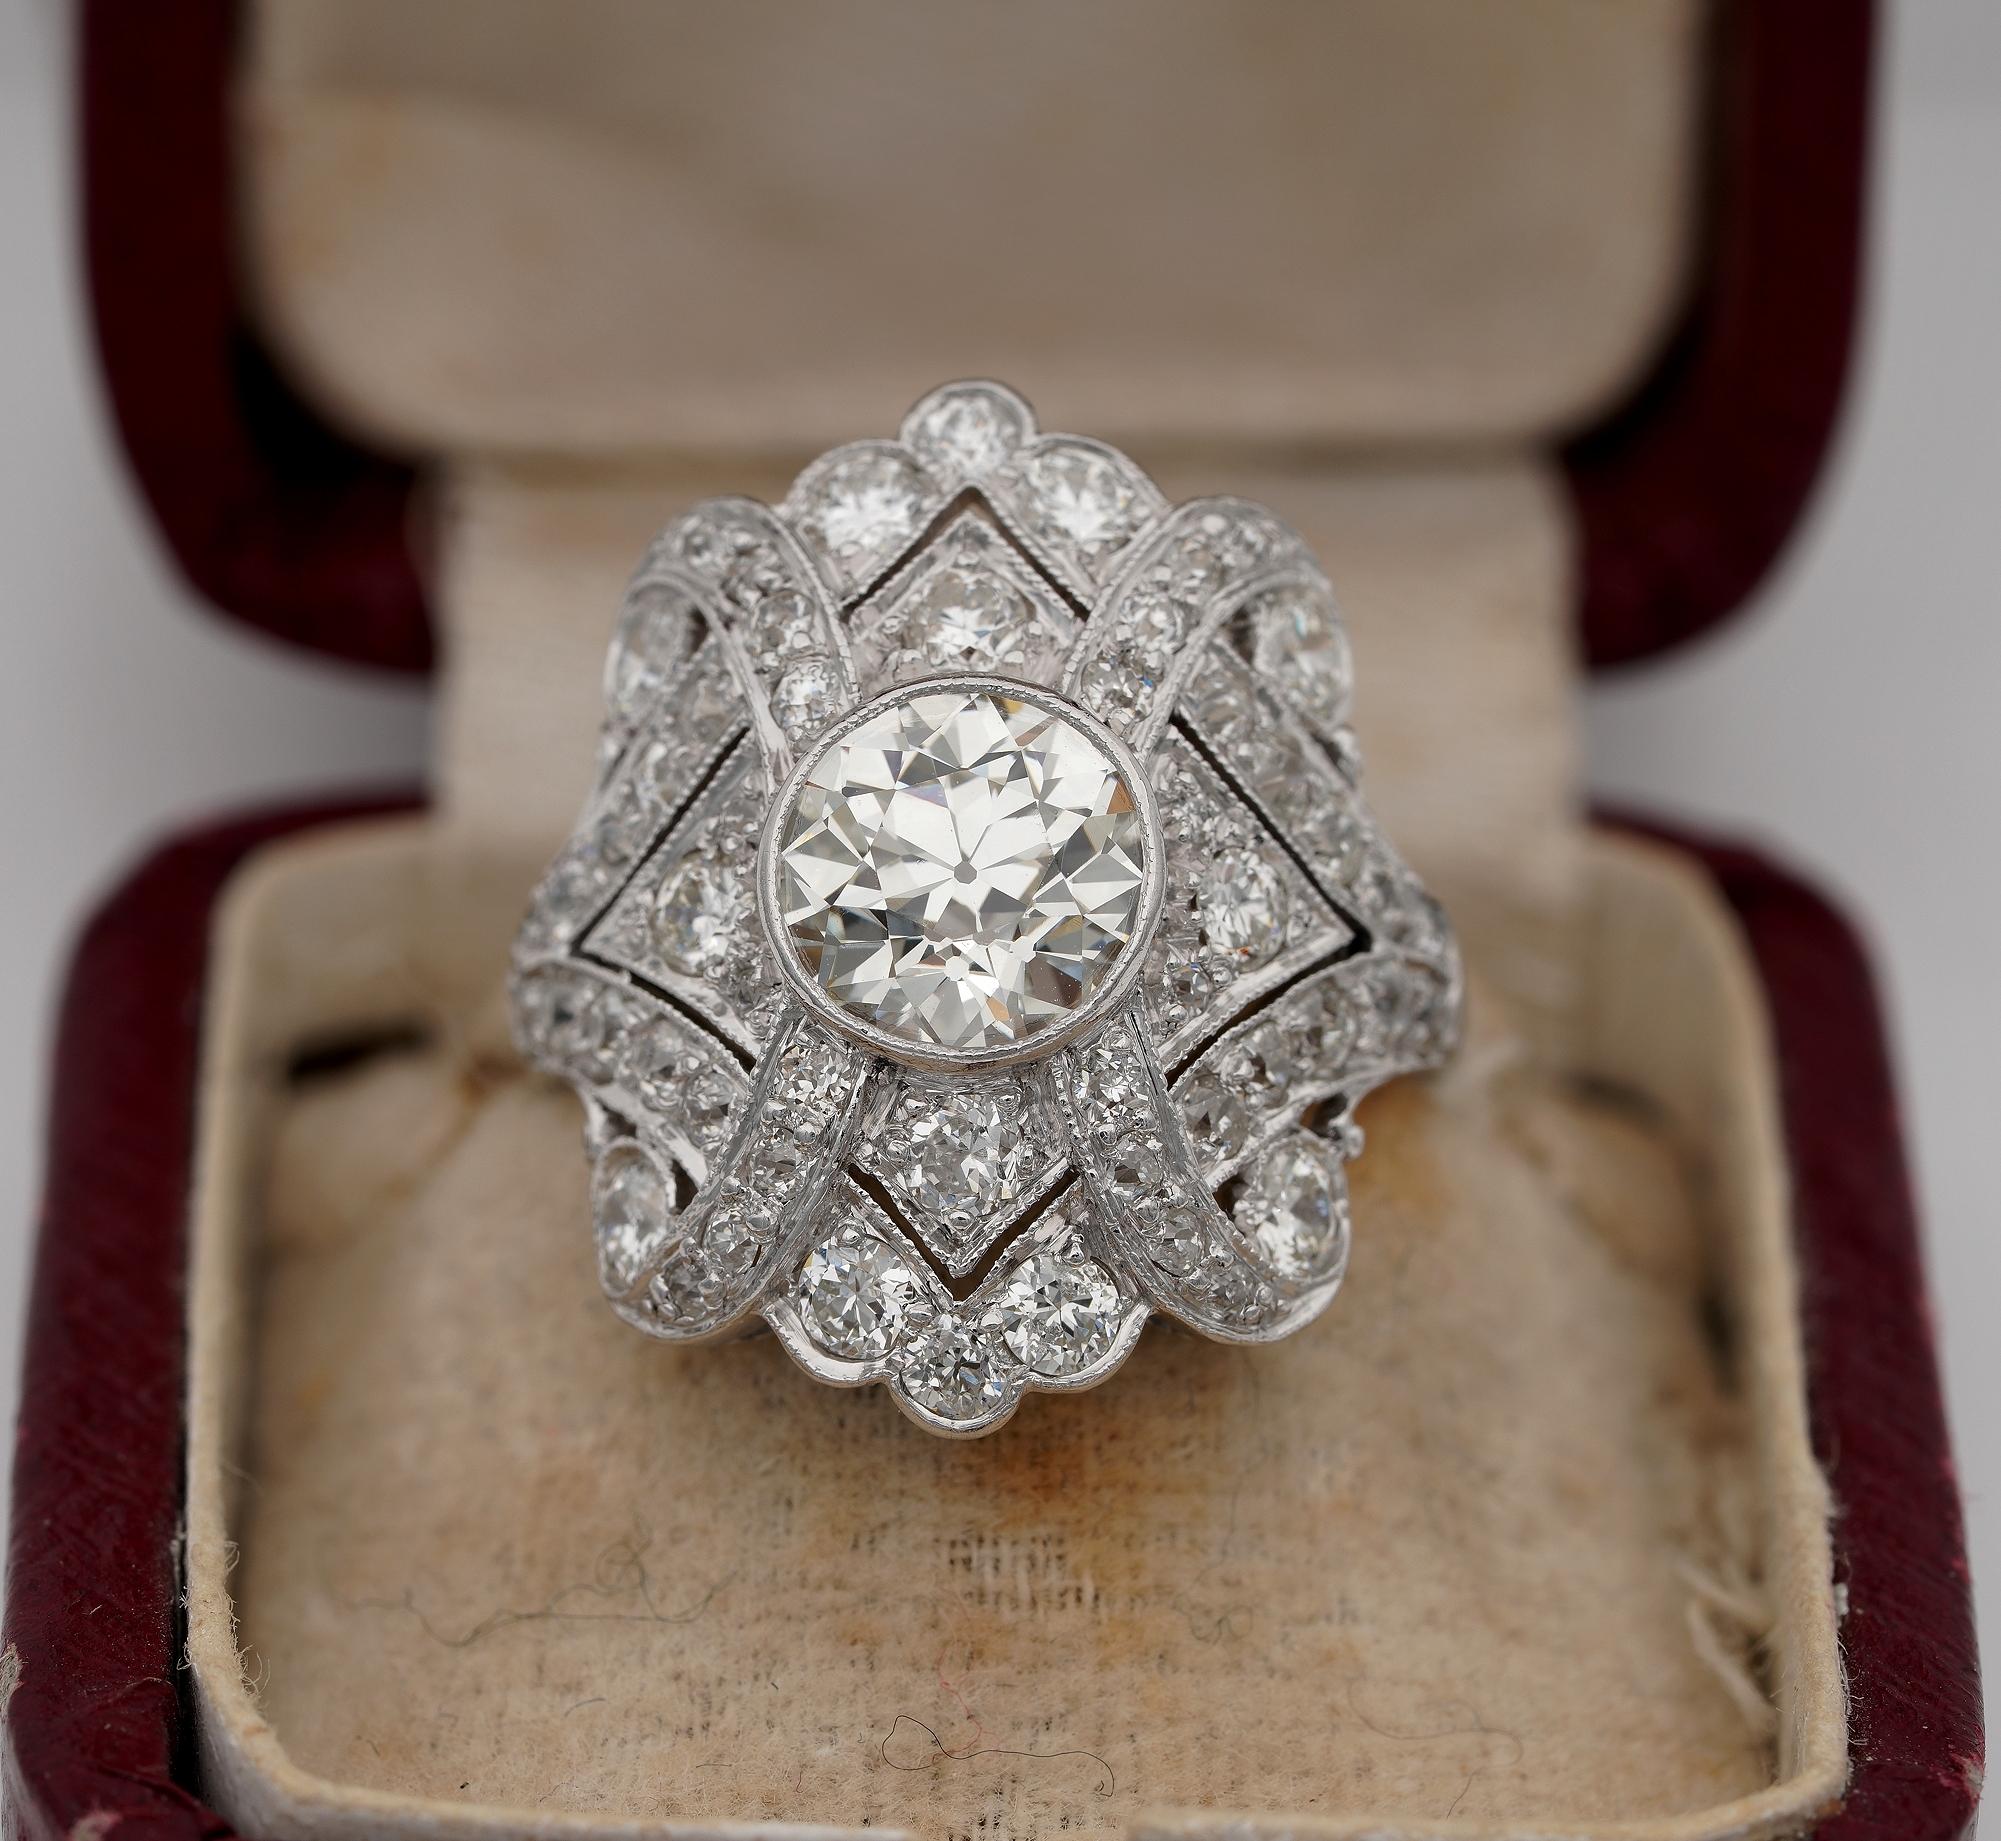 Art Deco Dazzler
Beautiful Art Deco period Platinum made Diamond plaque ring
Artfully hand crafted as unique during 1920's in a dazzling plaque design to display Diamond opulence
Centre Diamond is one old European cut of 1.75 CT (I/J/VVS1 – agd 7.6